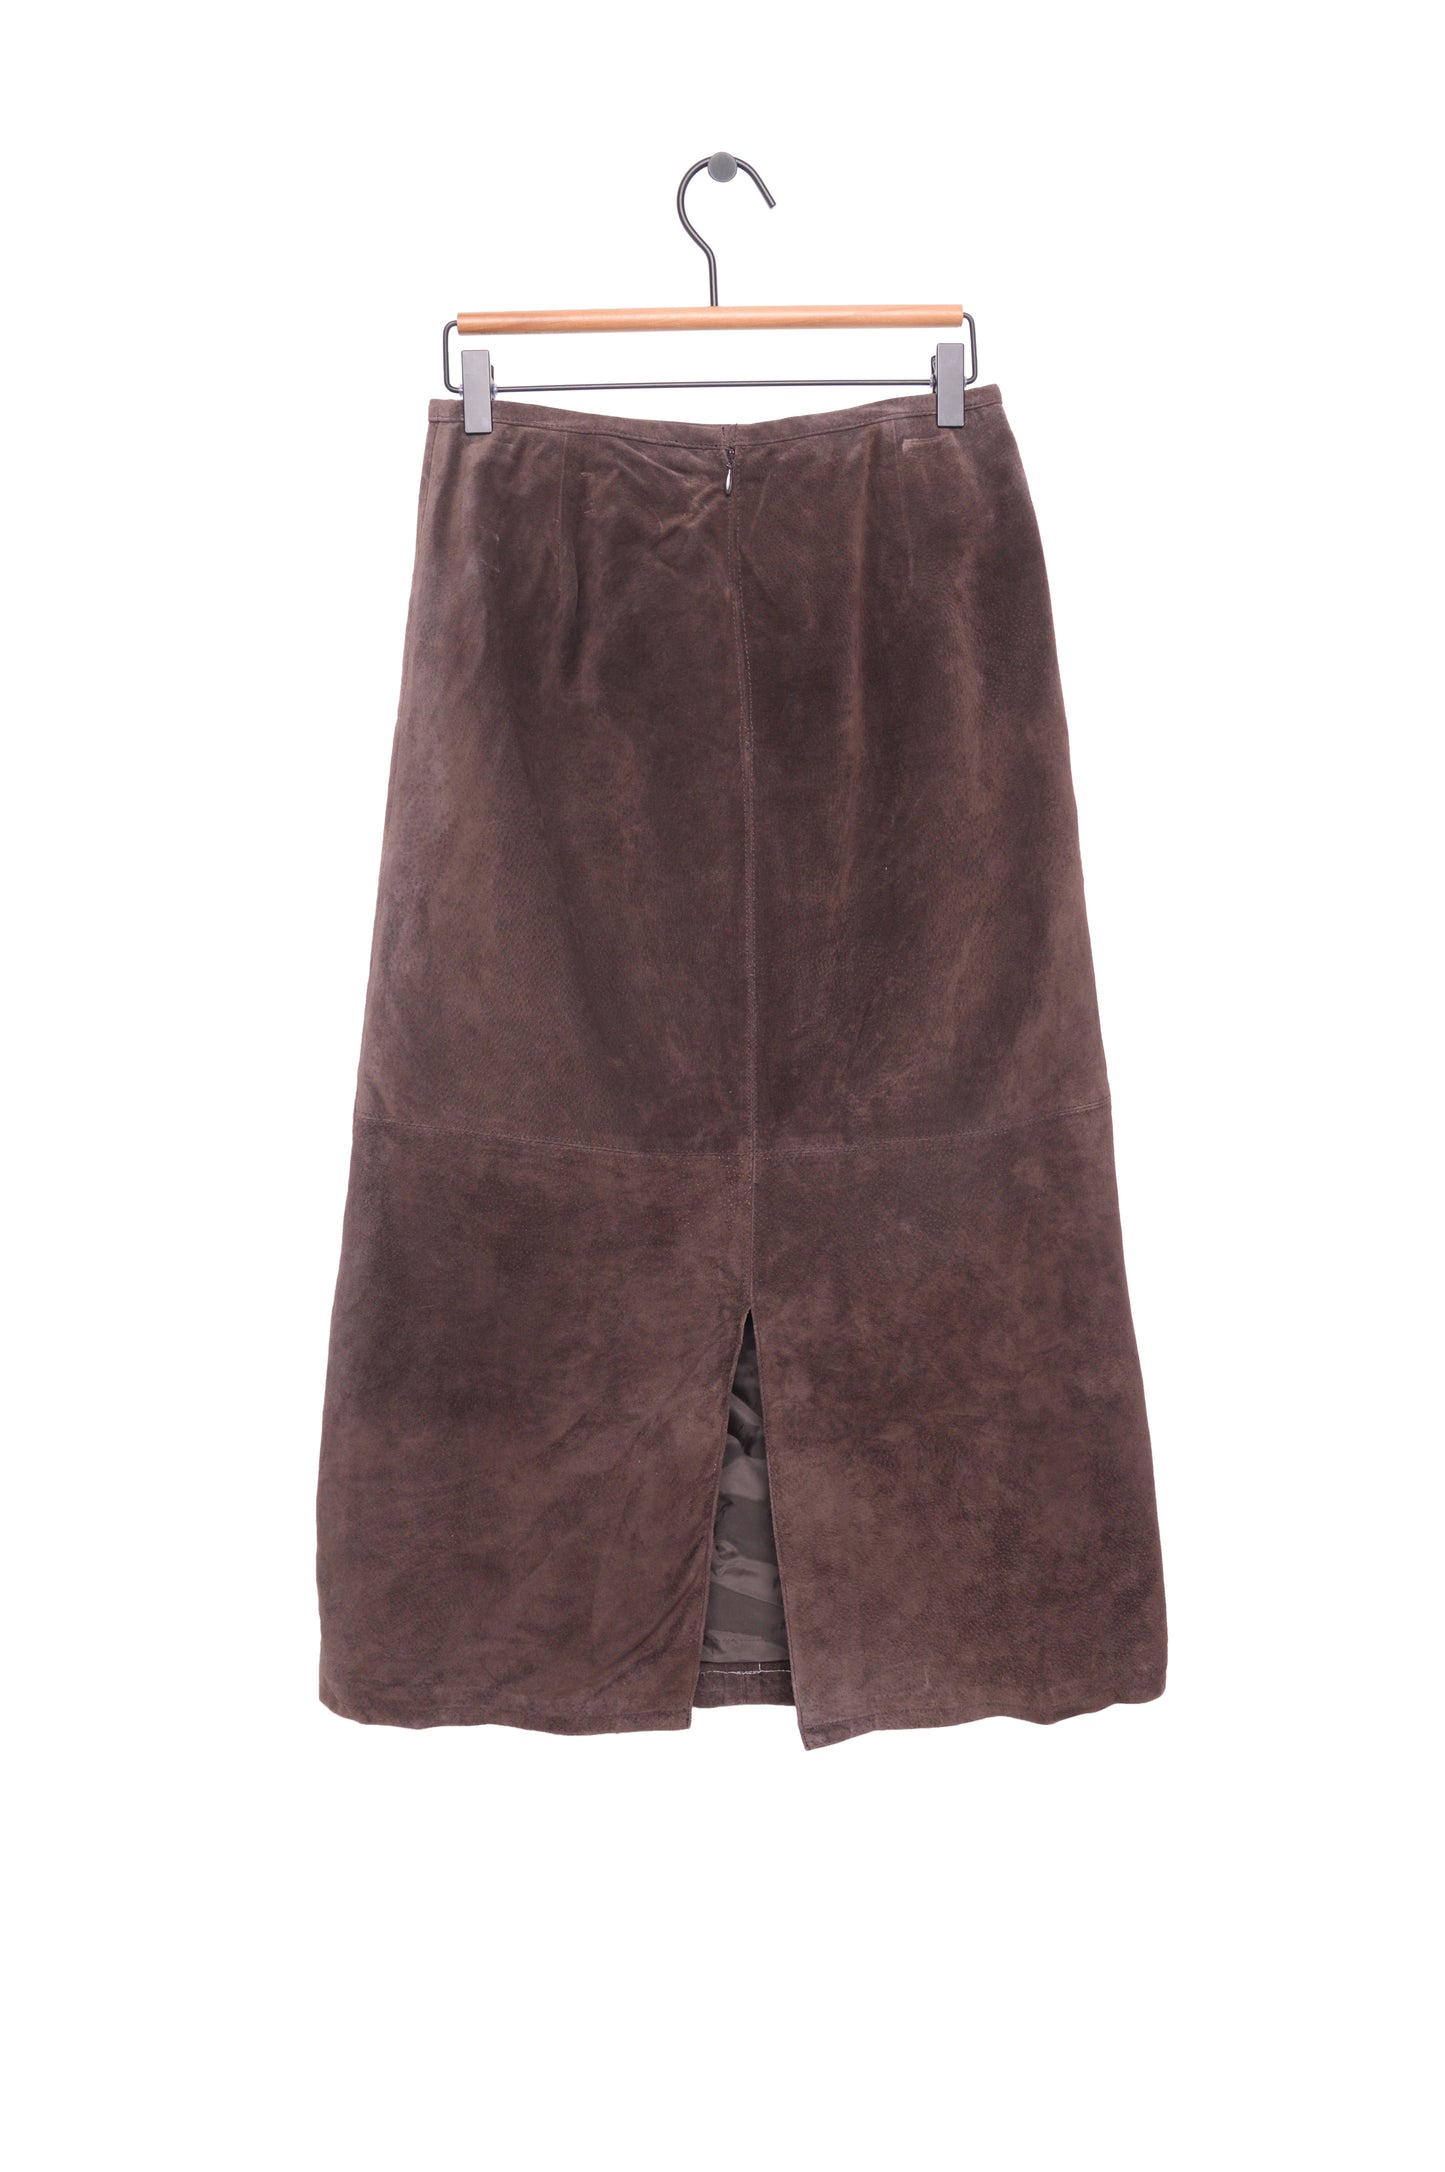 Chocolate Suede Maxi Skirt